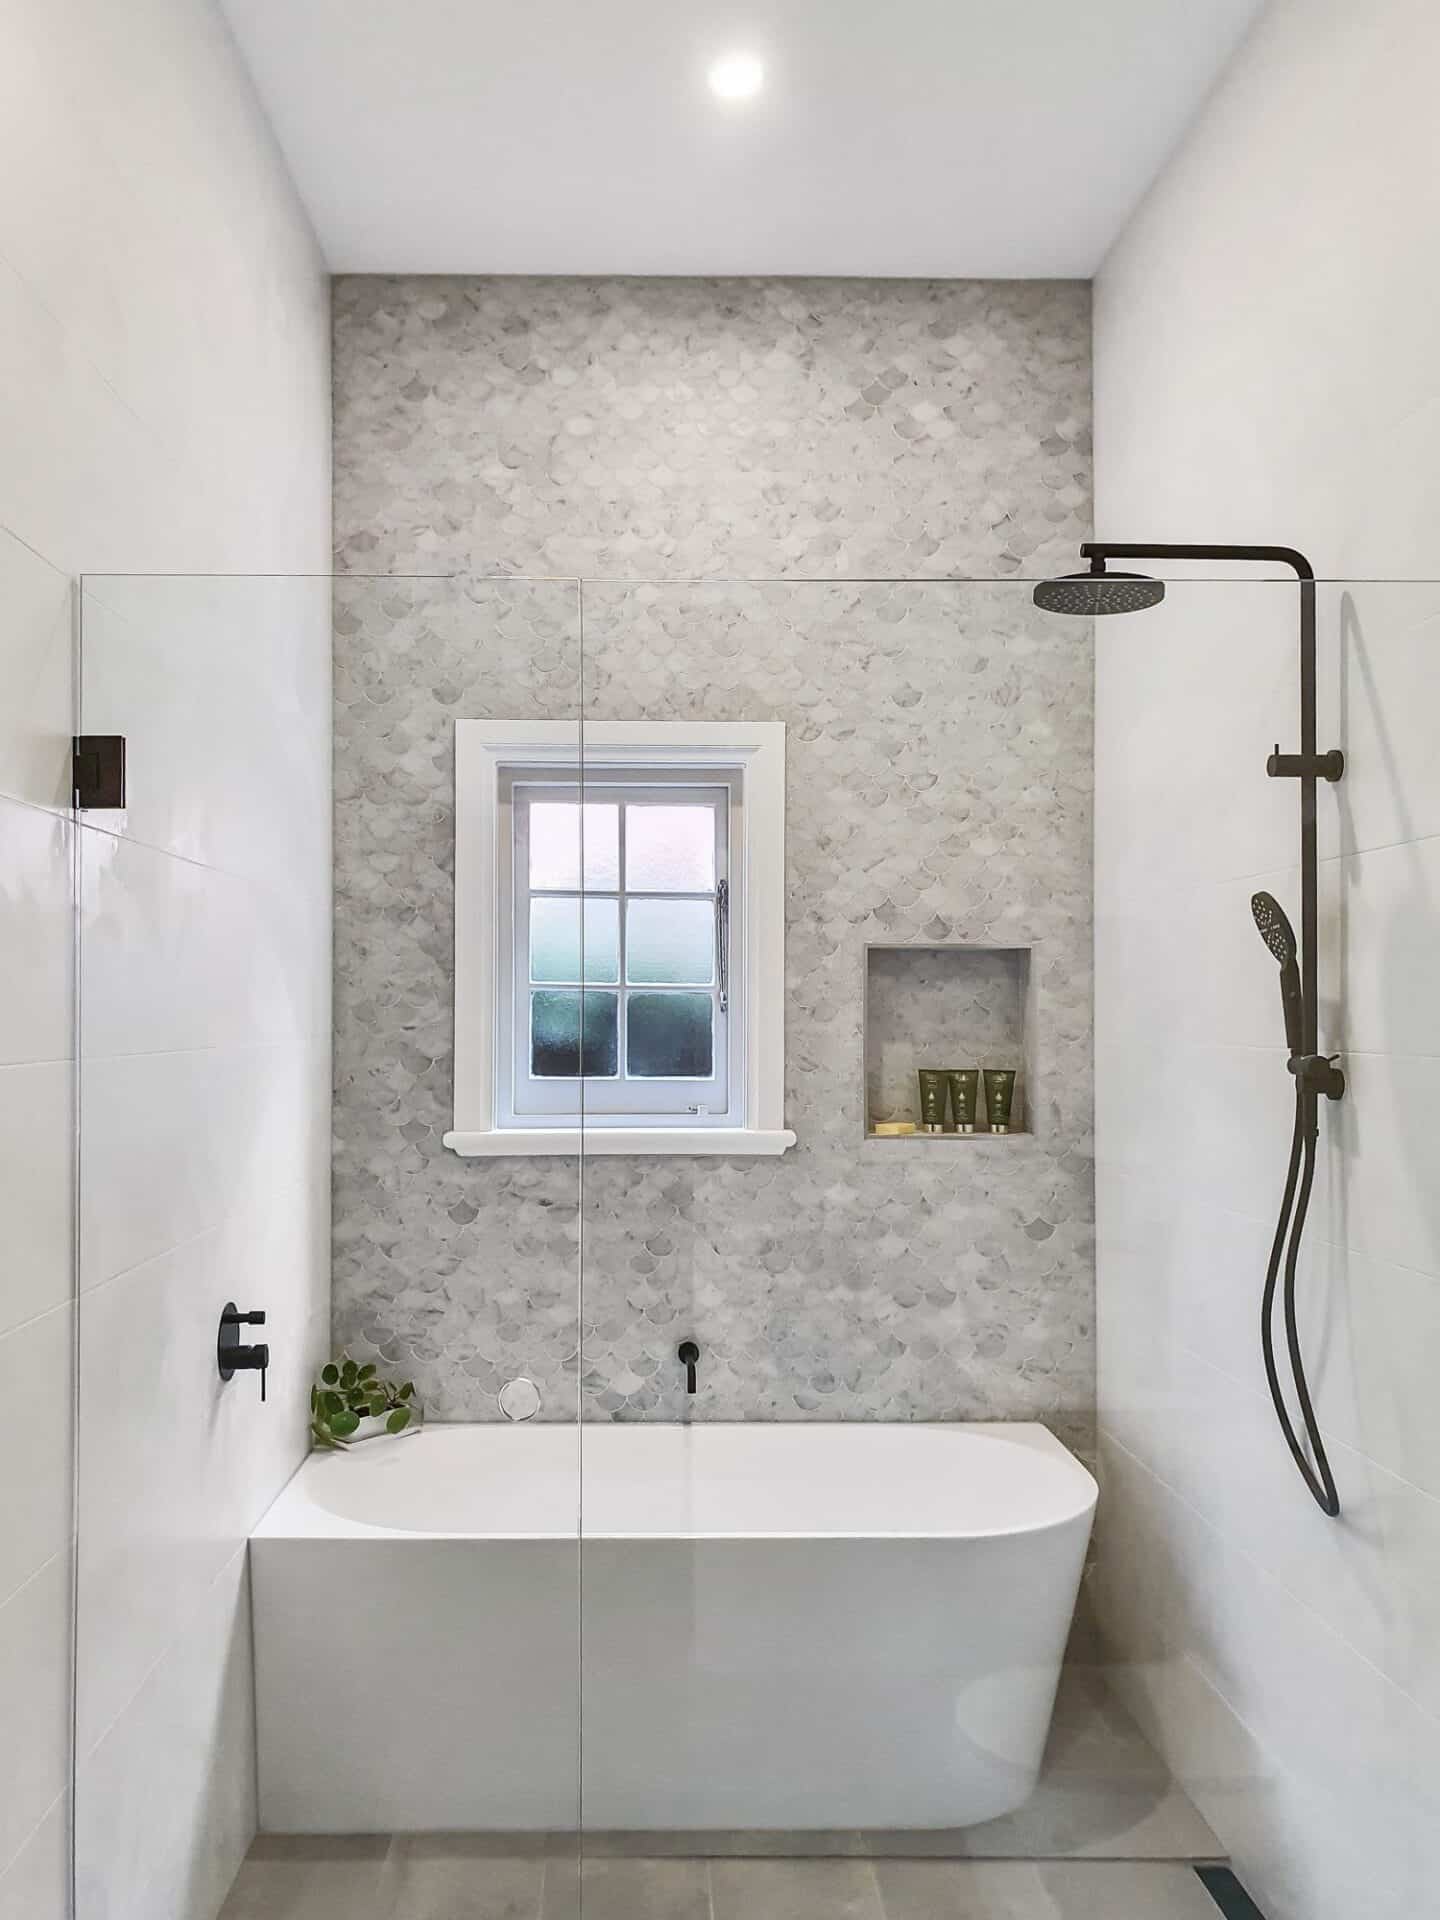 Bathtub & Shower Renovations Services by Bayview Renovations